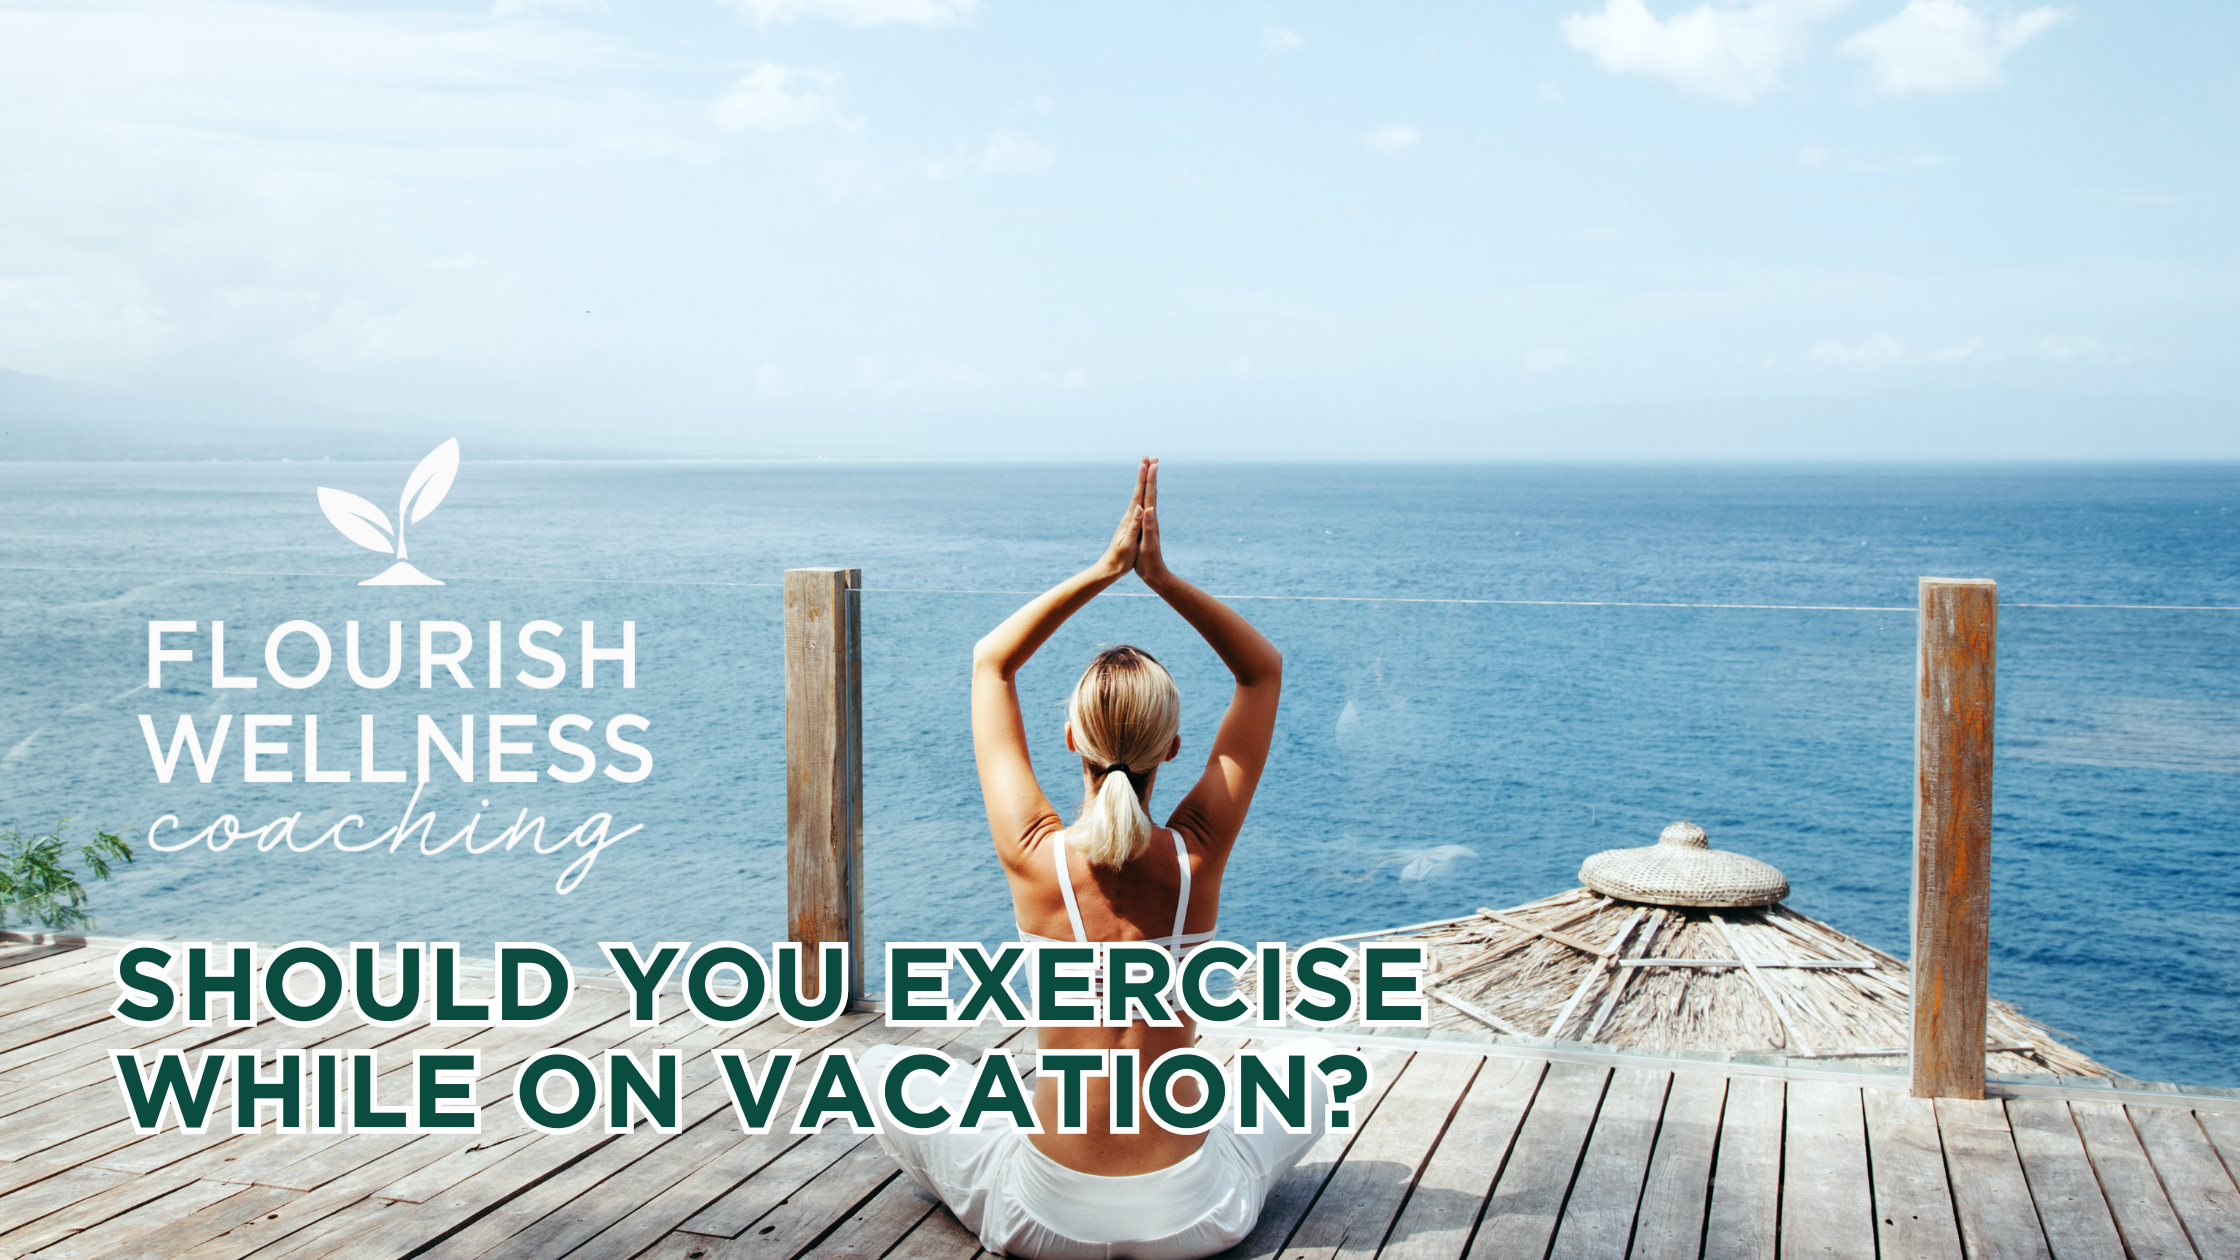 Should You Exercise While On Vacation?